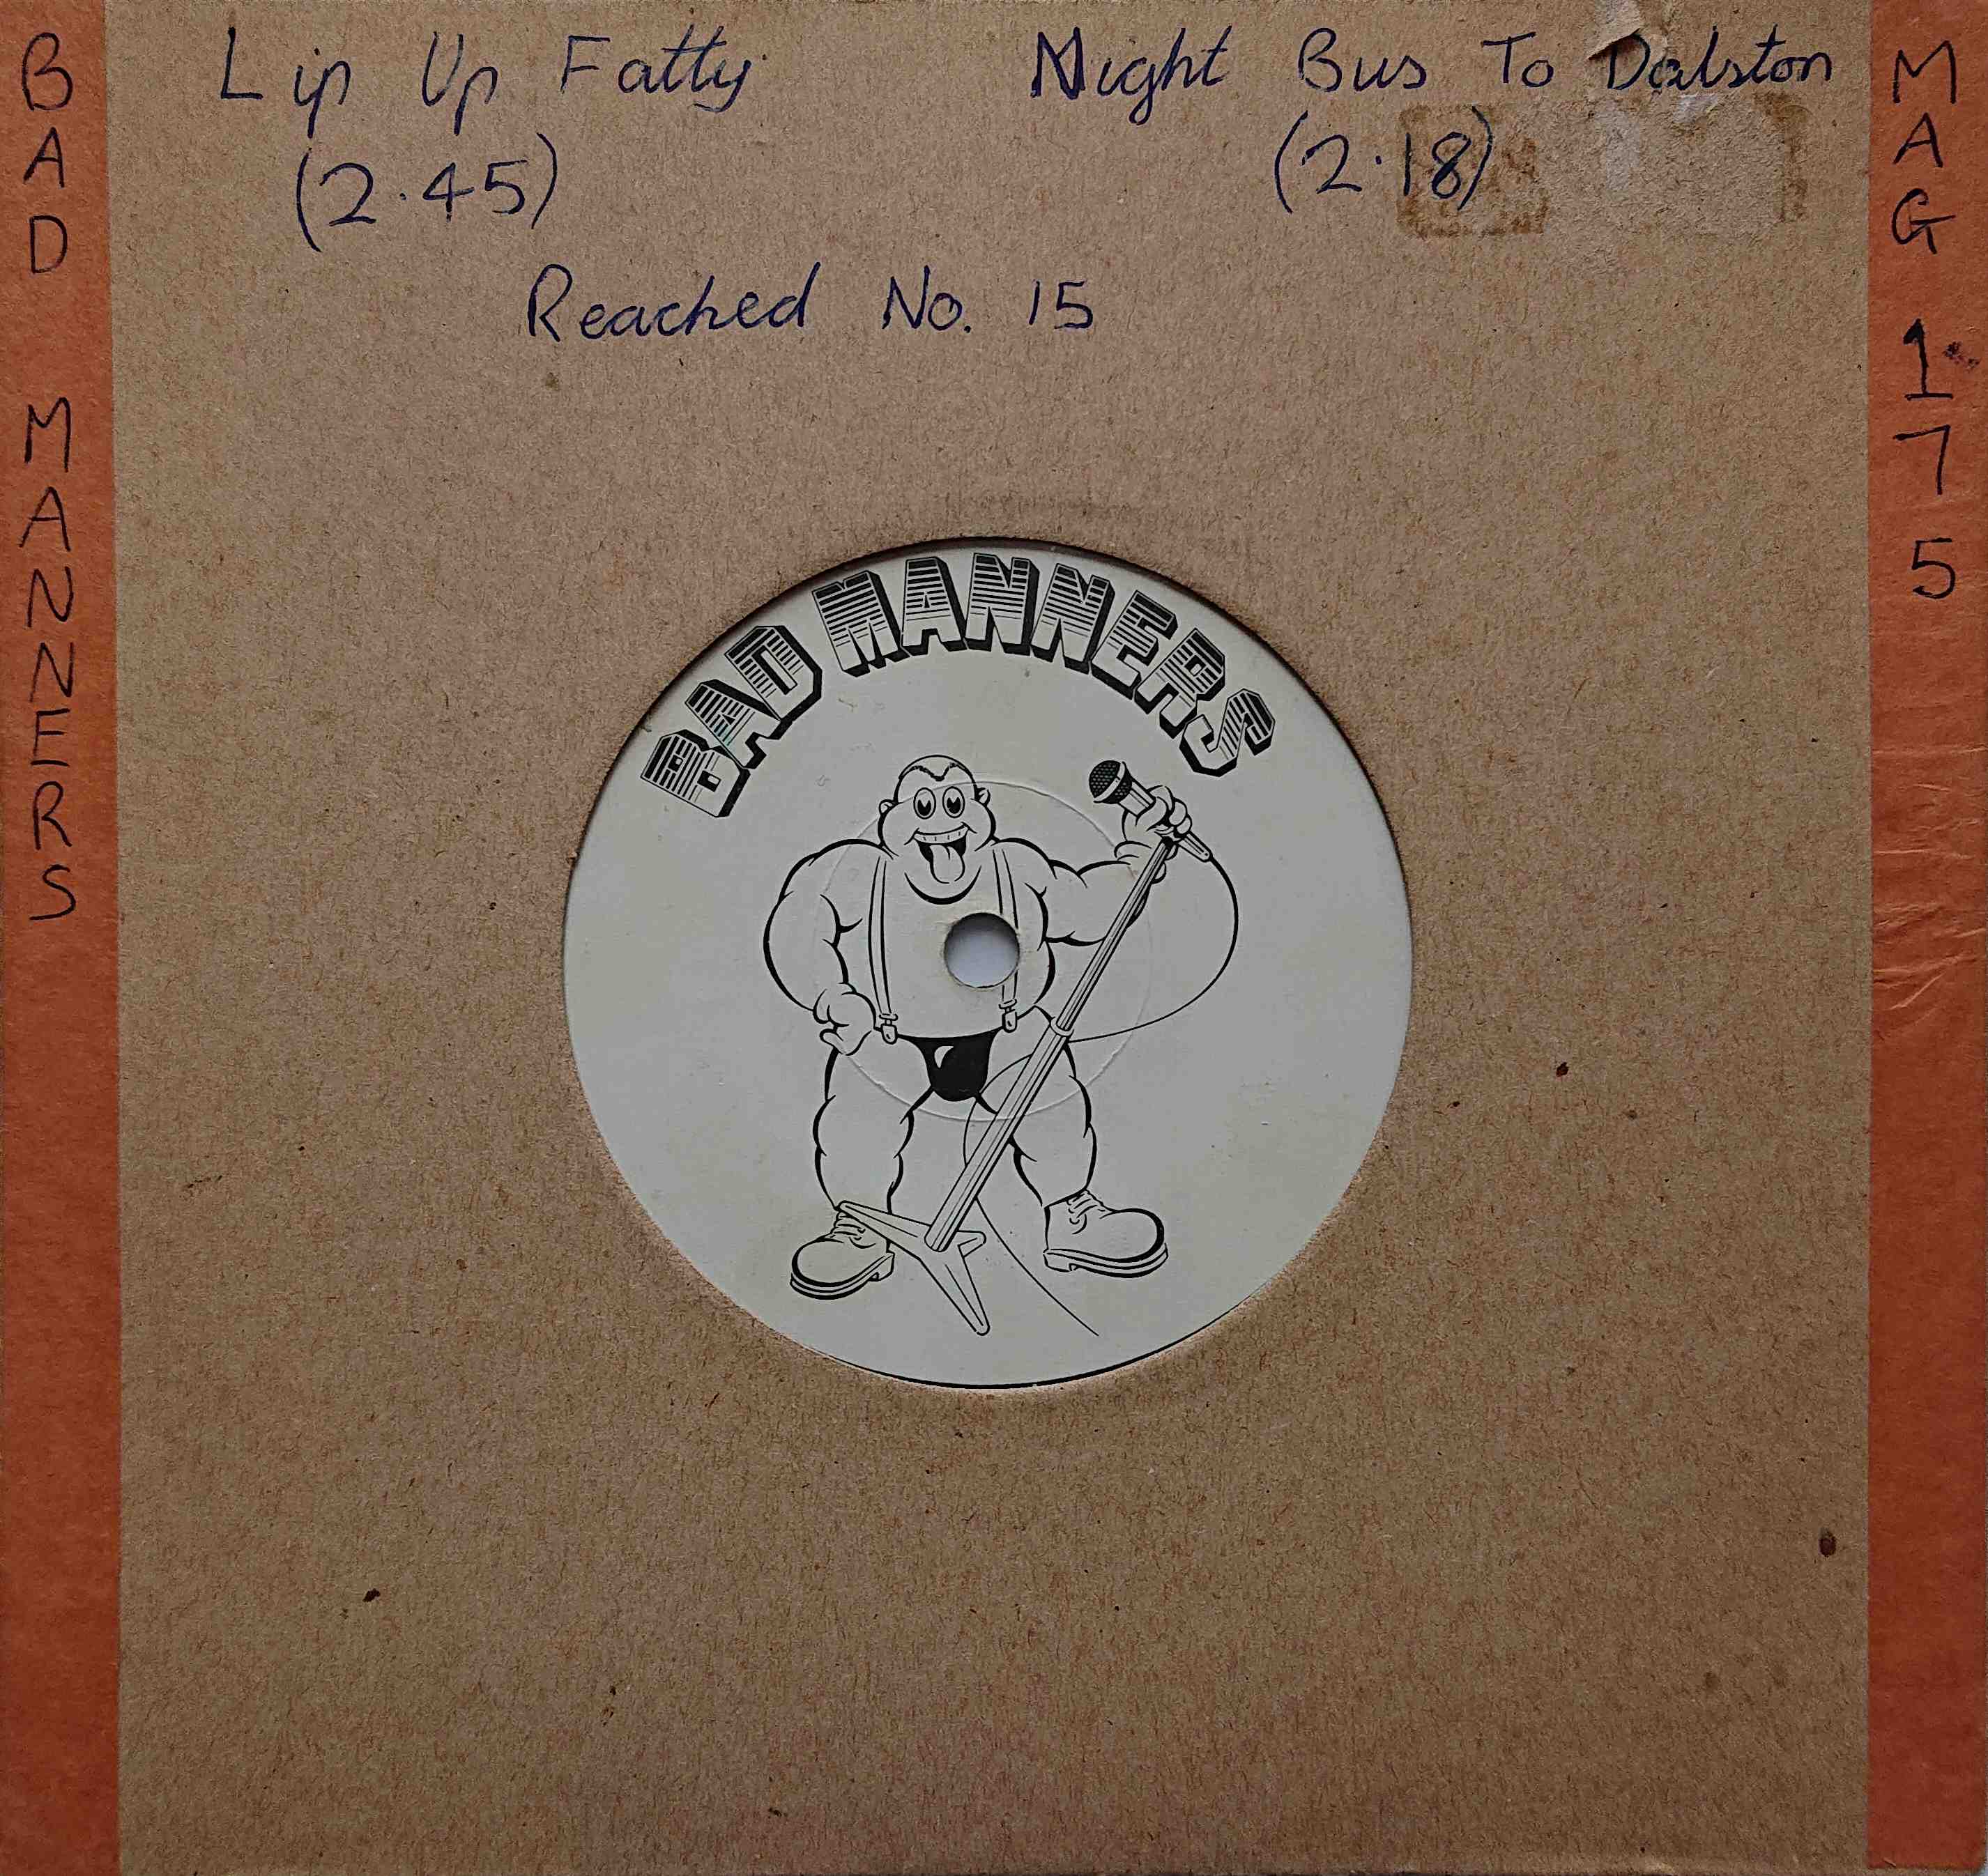 Picture of Lip up fatty by artist Bad Manners 